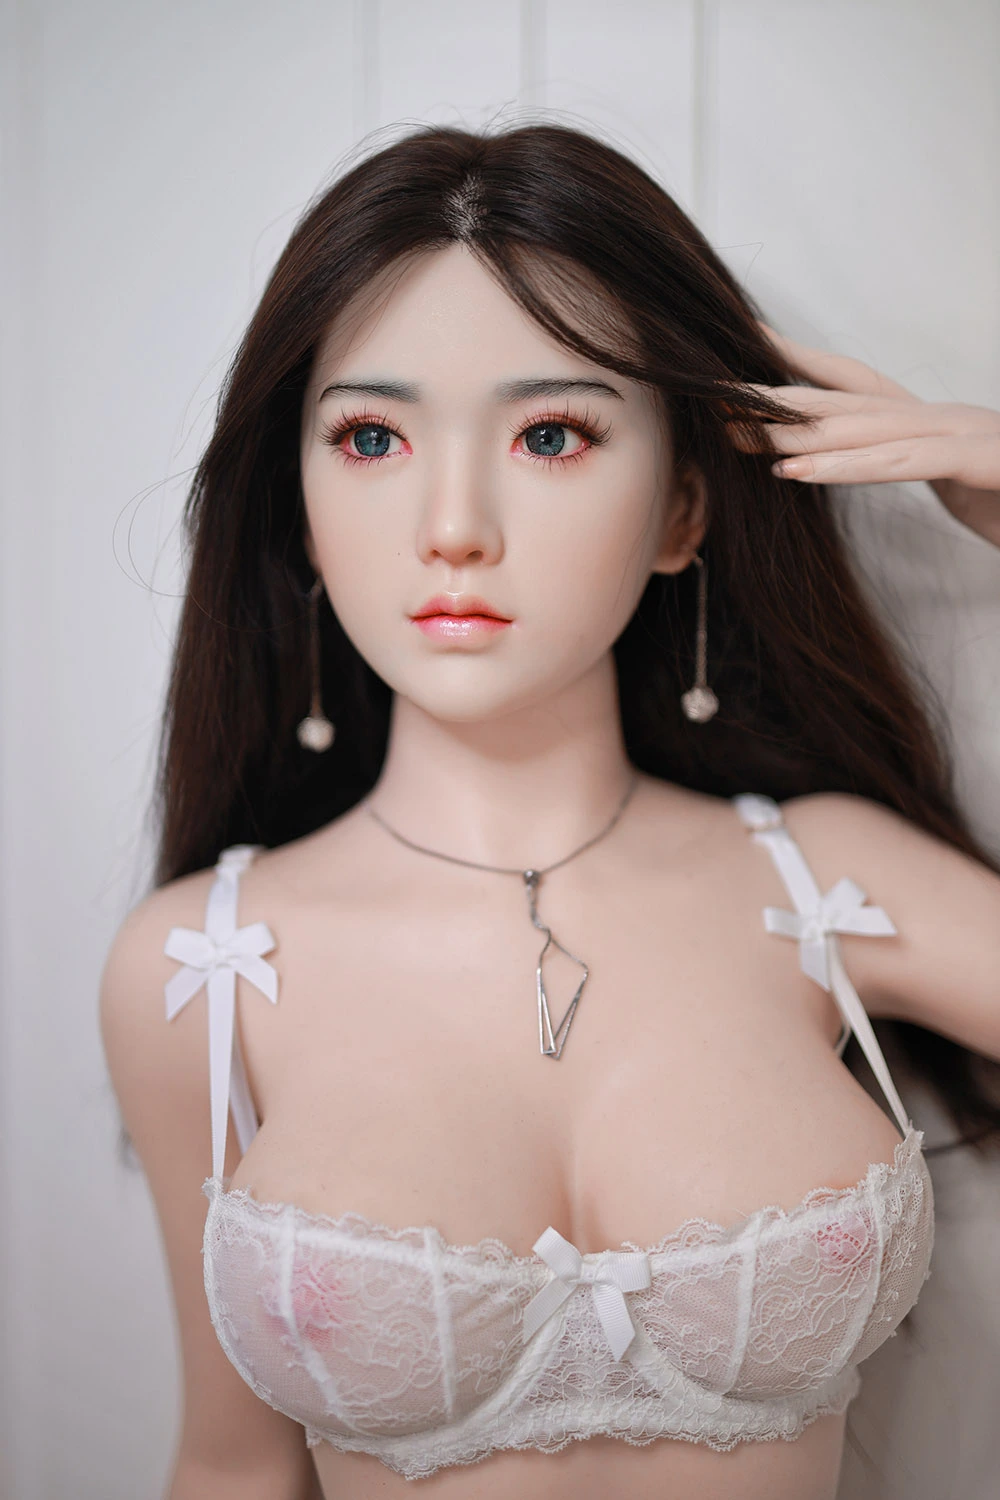 165cm Skinny Curves Japanese Teen Sex Doll Qi Xiao